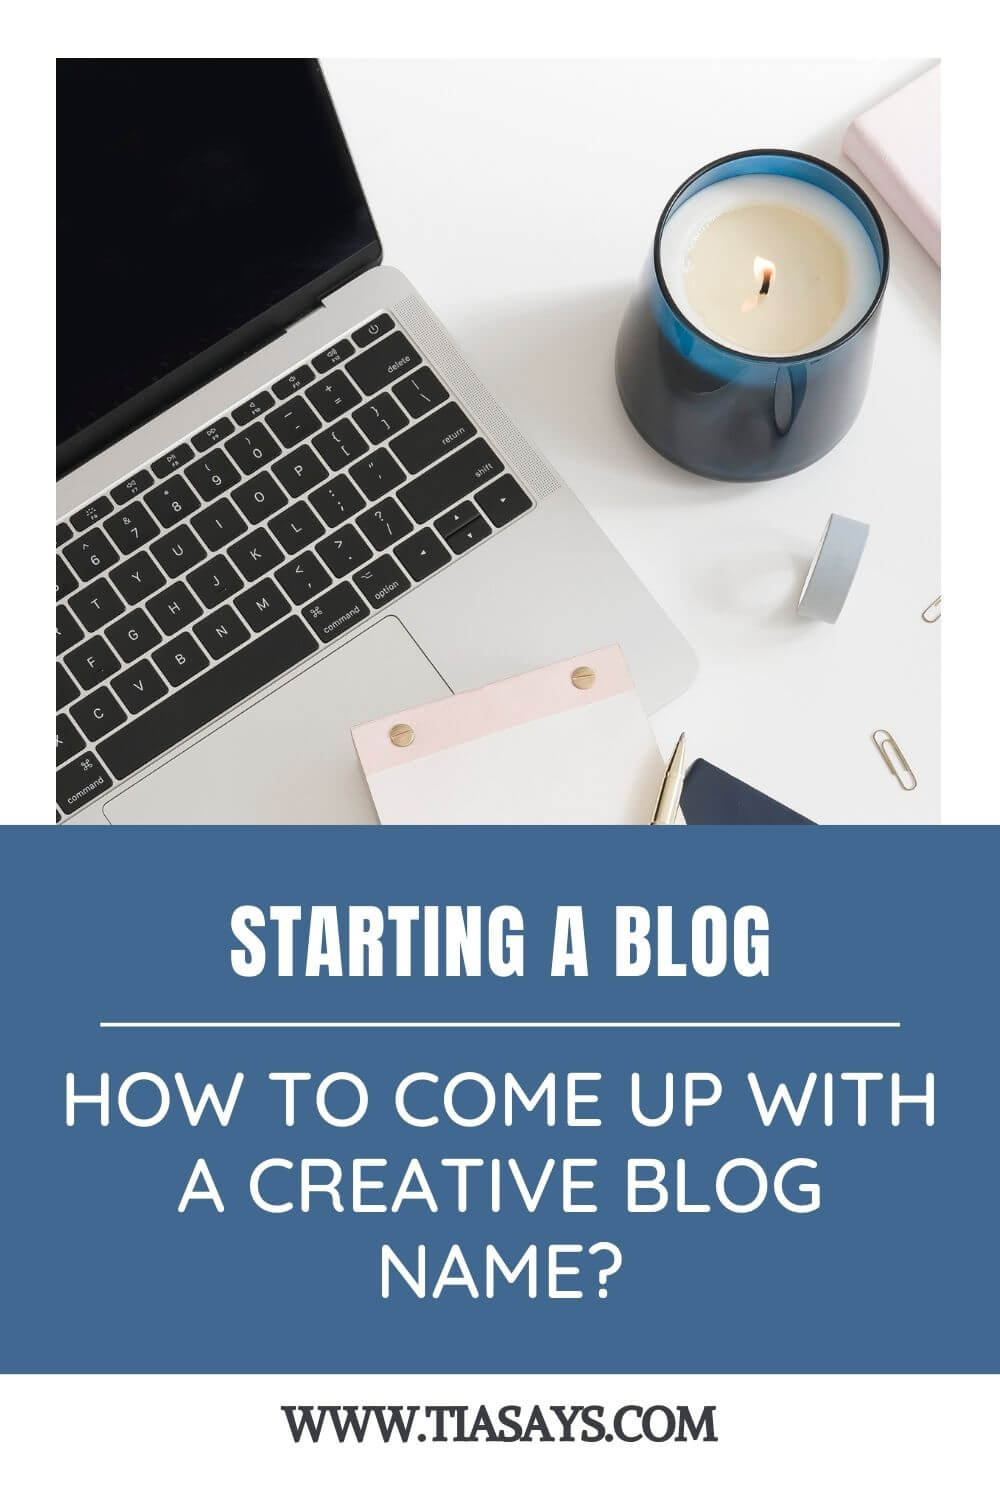 how to come up with a creative blog name?